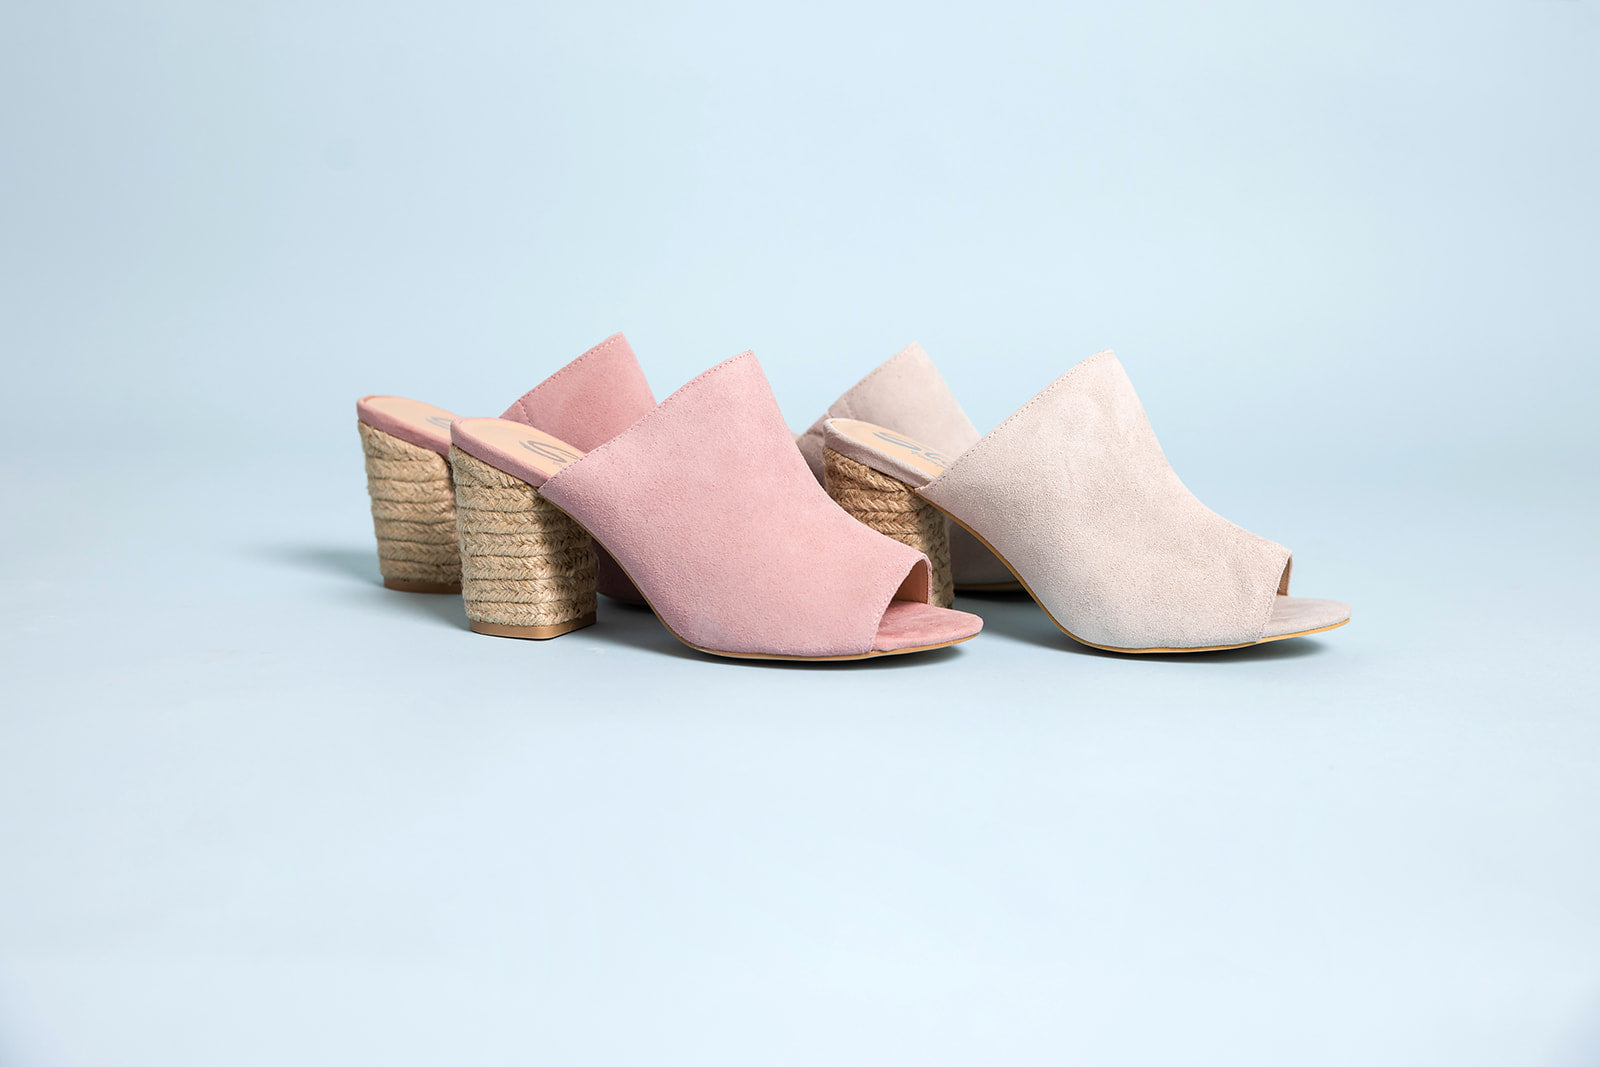 Helena Heeled Sandal in Ice Suede